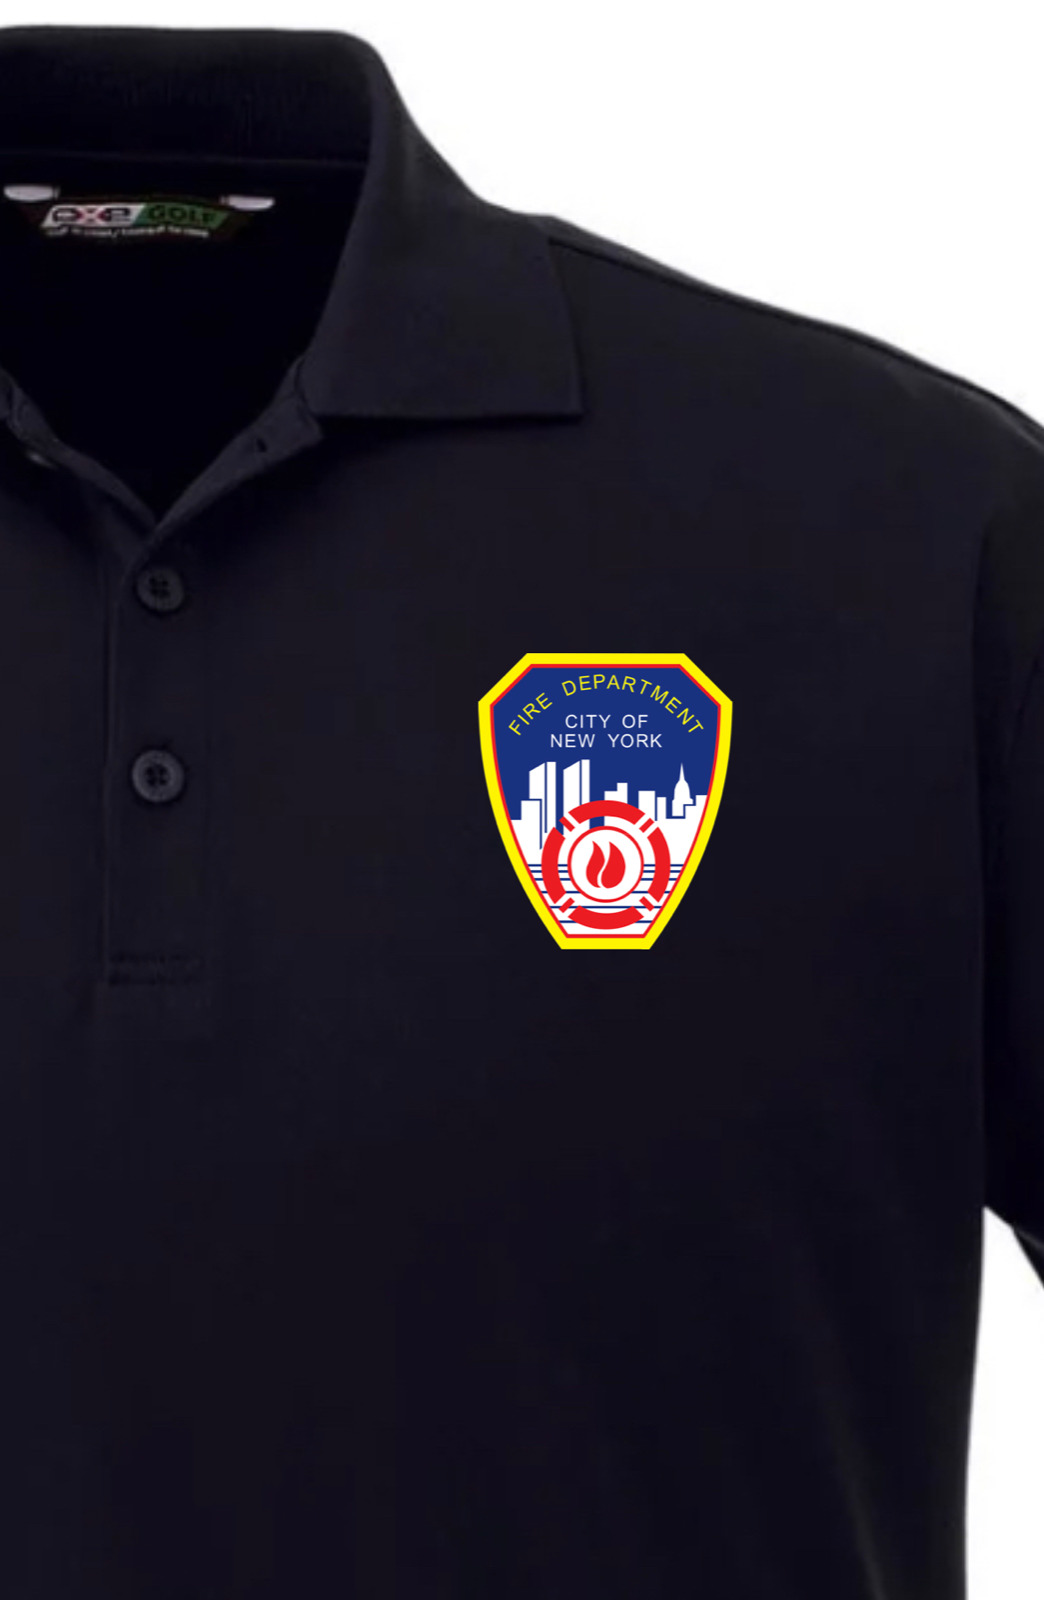 Polo FDNY fire dept Performance Shirt for Men Gift High Quality Polyester